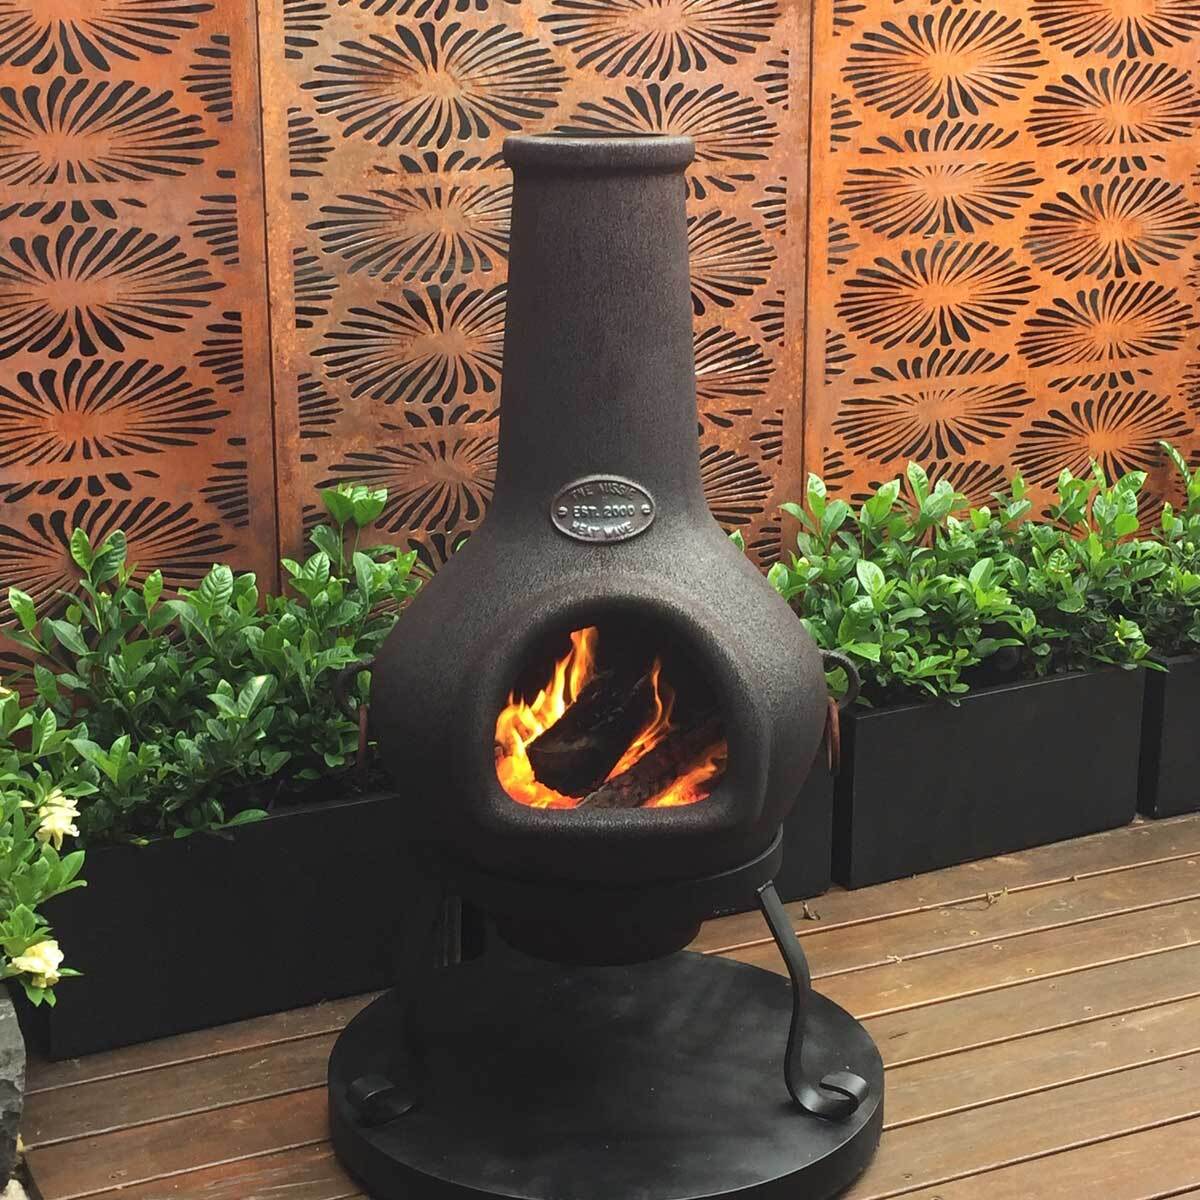 Cast Iron Chiminea Classic Style, Chiminea Fire Pit Pizza Oven